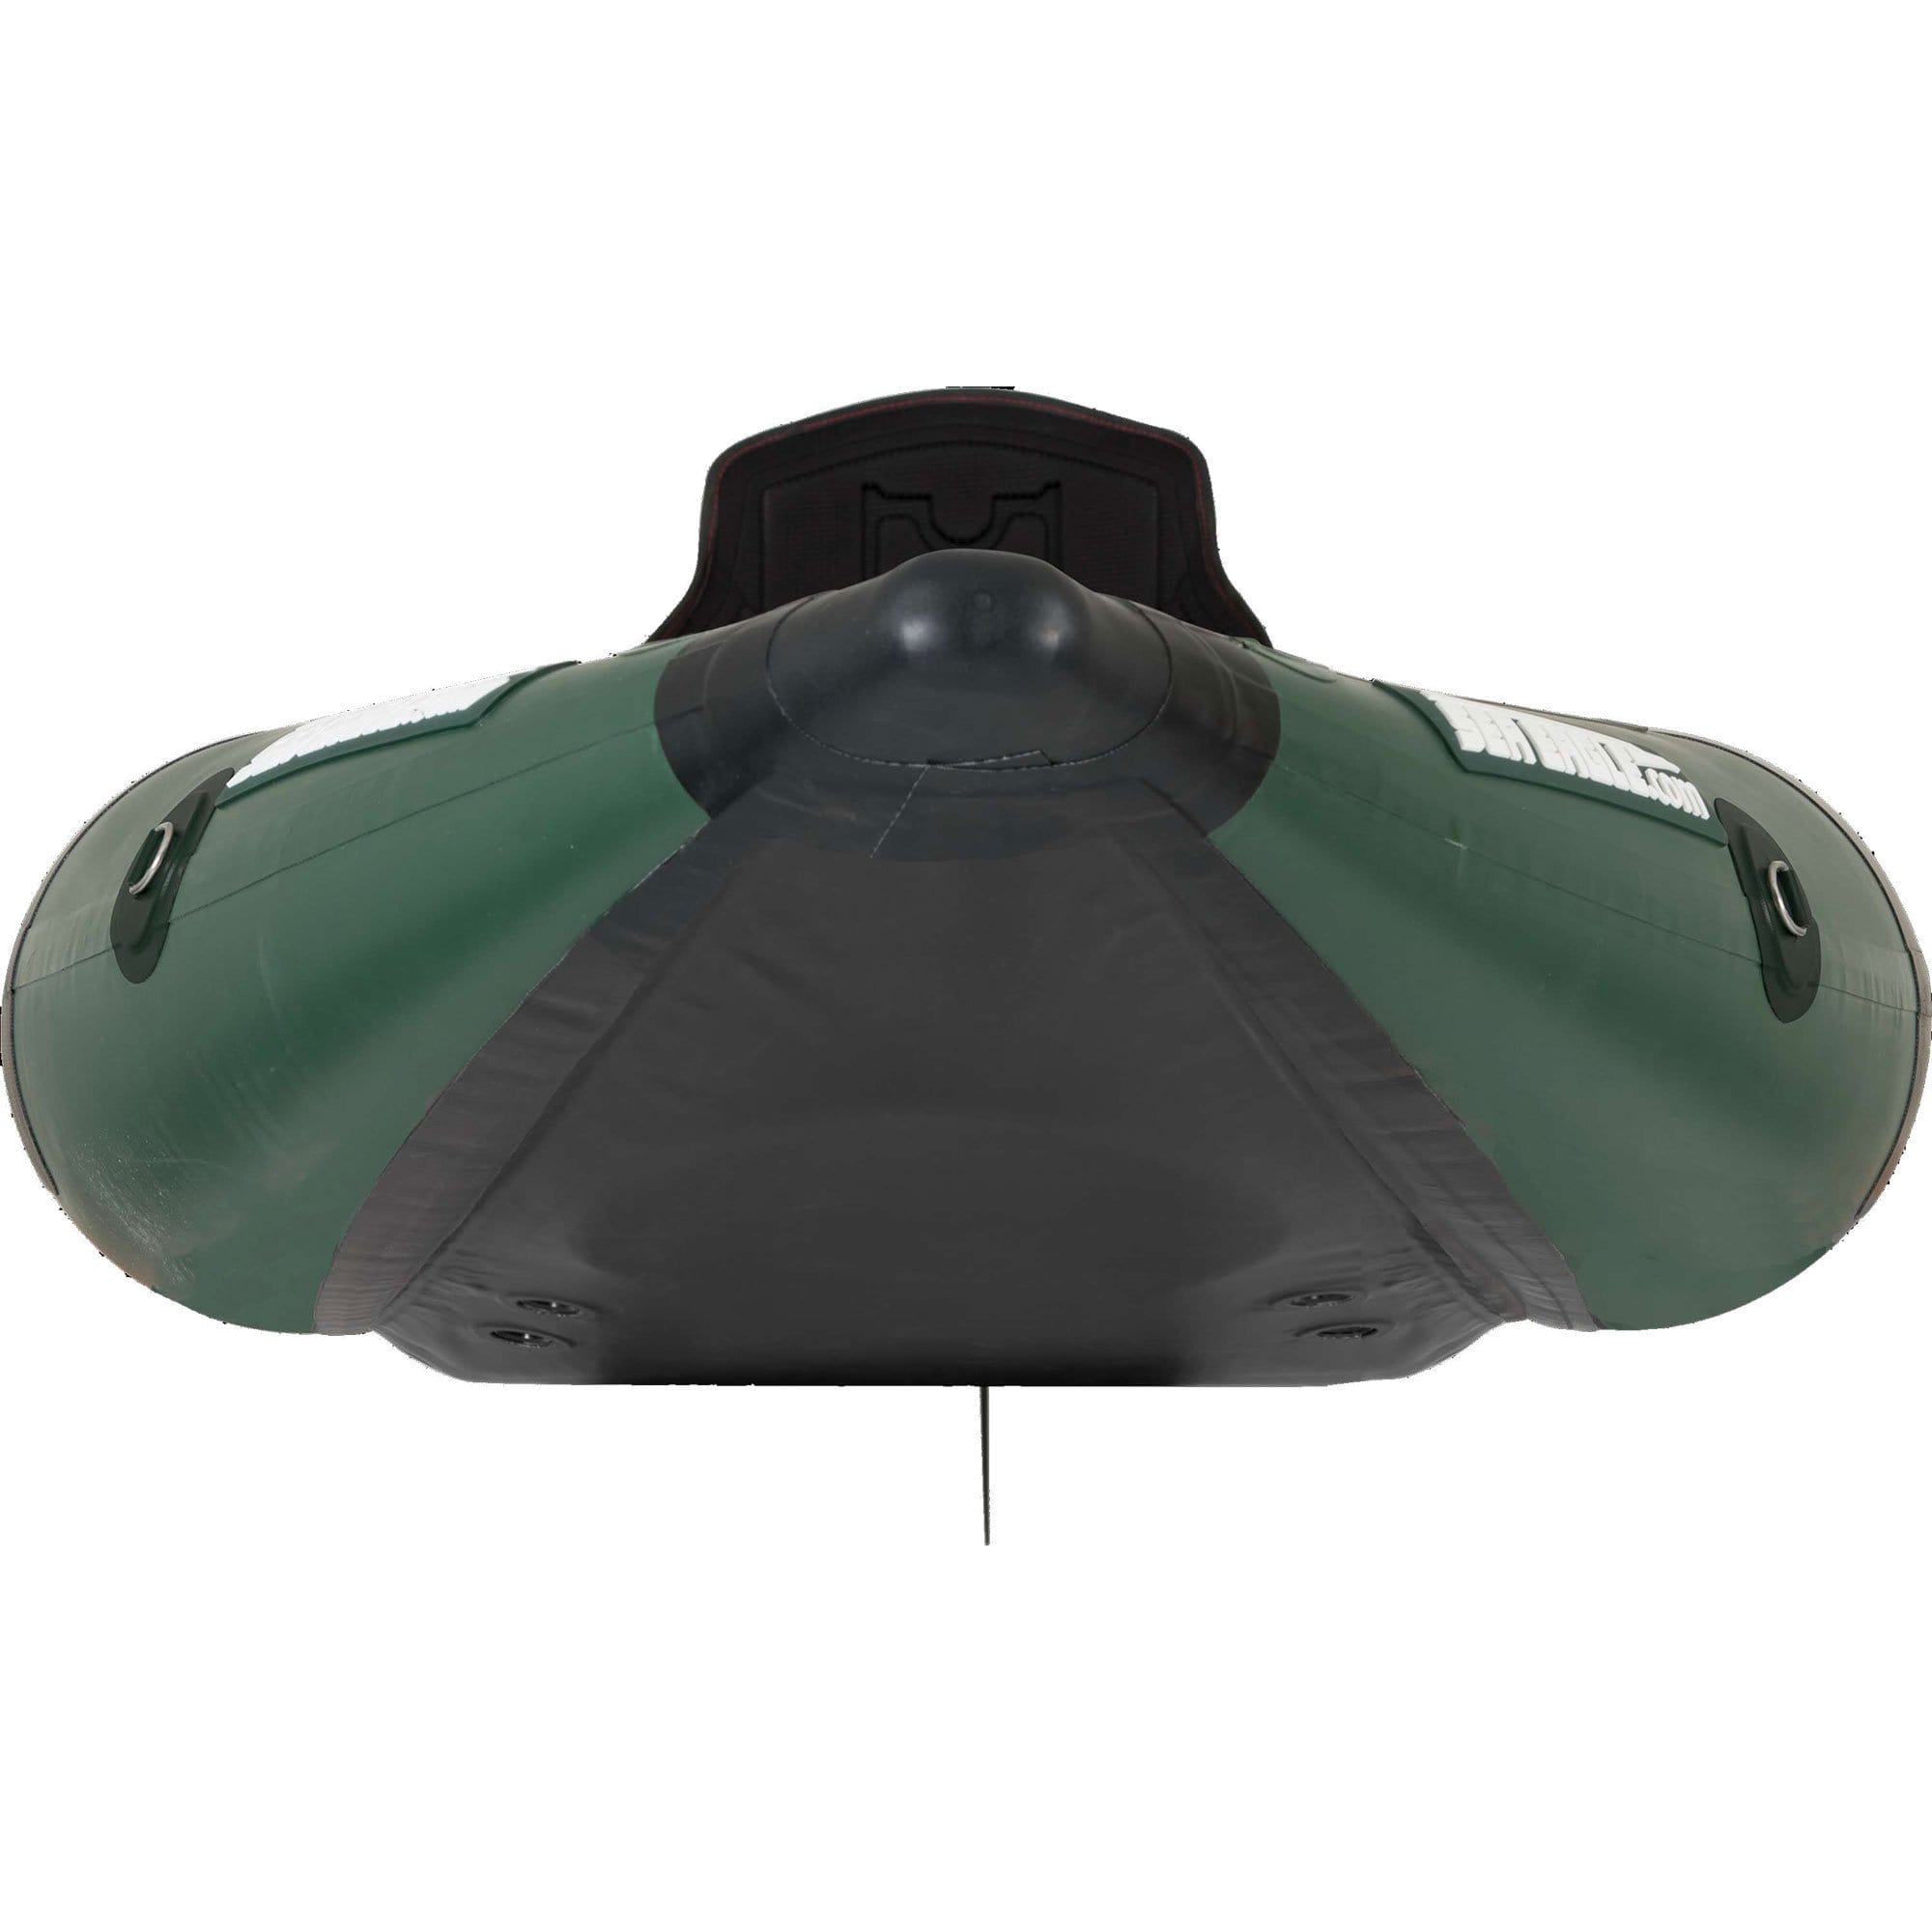 SeaEagle Inflatable Kayak Sea Eagle - 350FX One Person 11'6" Green Fishing Explorer Inflatable Fishing Boat Pro Solo Package ( 350FXK_PSB )